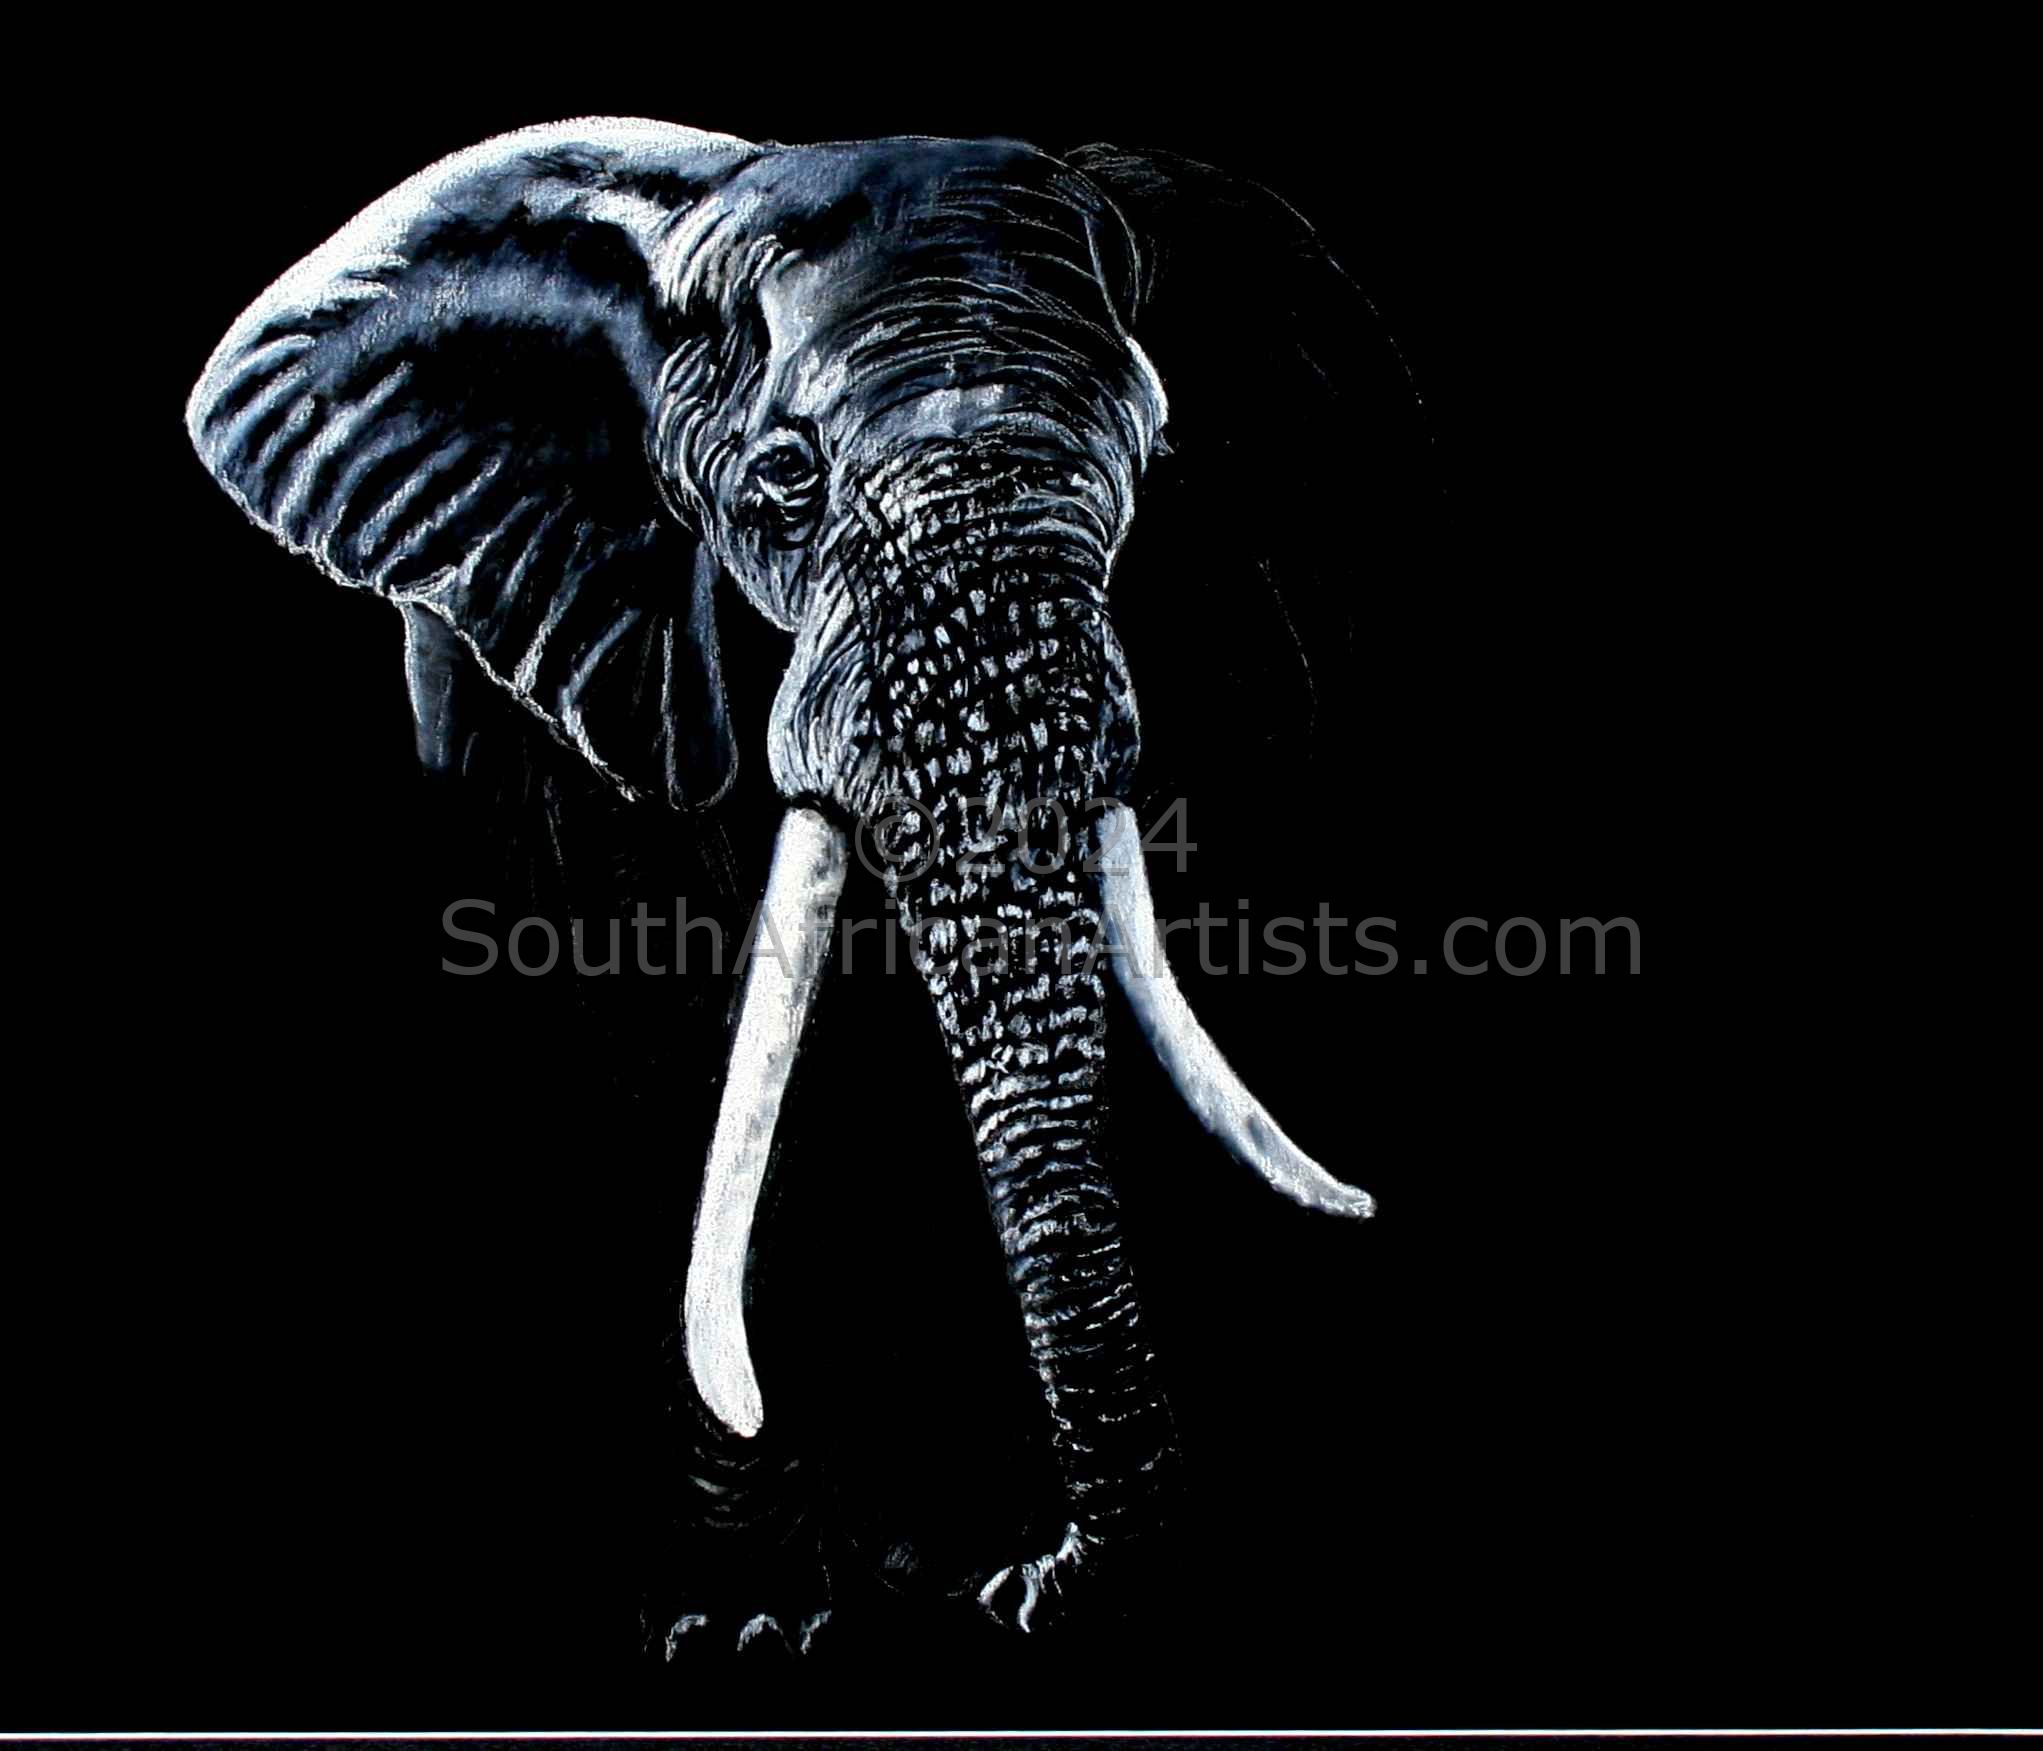 Elephant in Black and White 